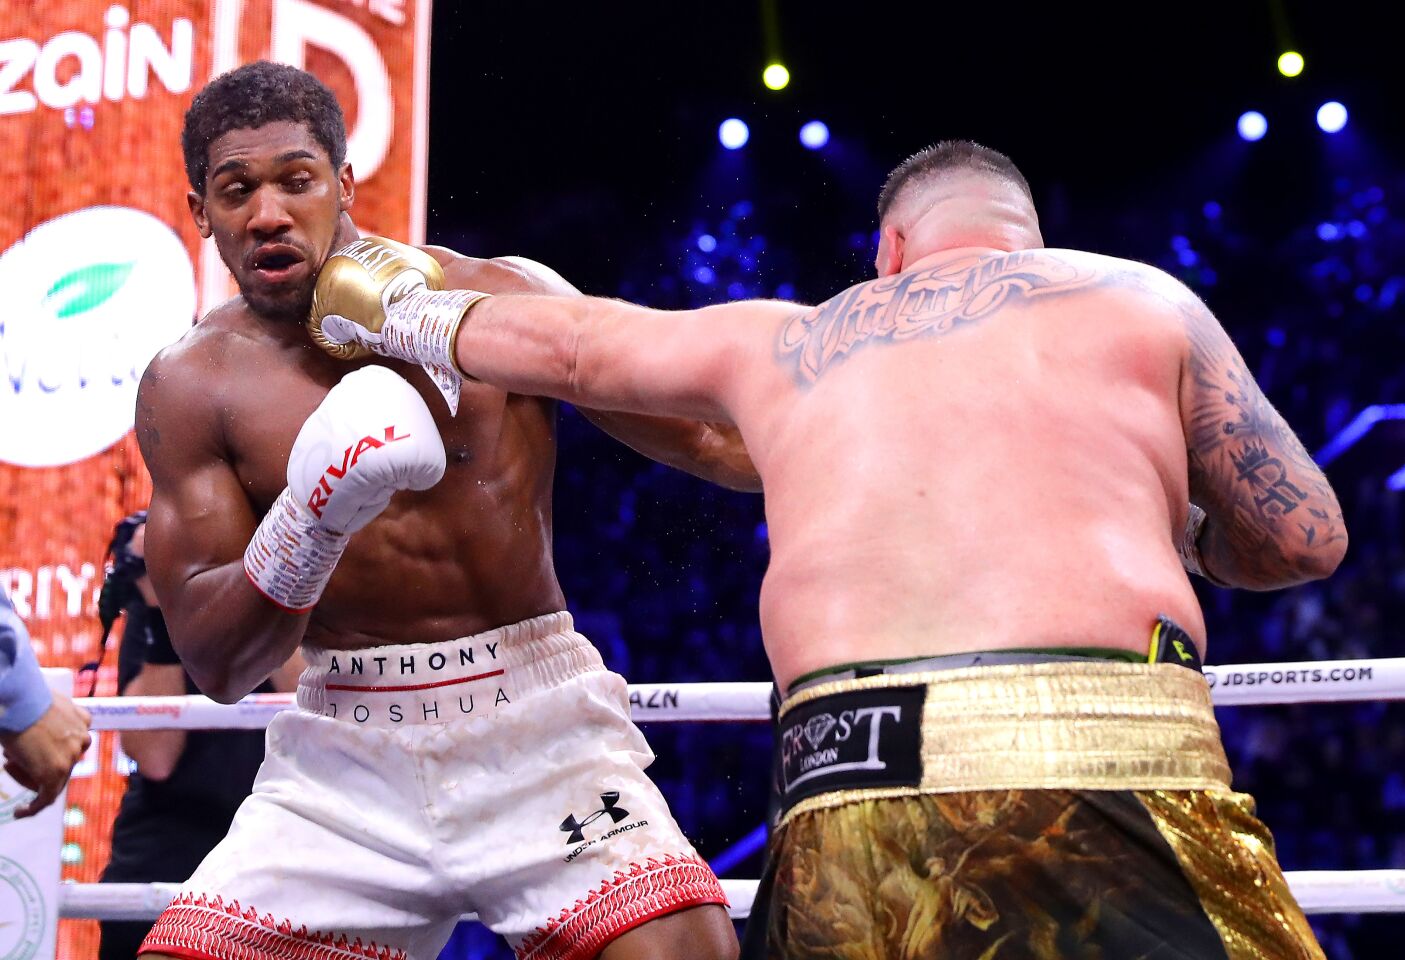 Andy Ruiz Jr. punches Anthony Joshua with a left hand during a heavyweight title fight on Dec. 7 in Diriyah, Saudi Arabia.